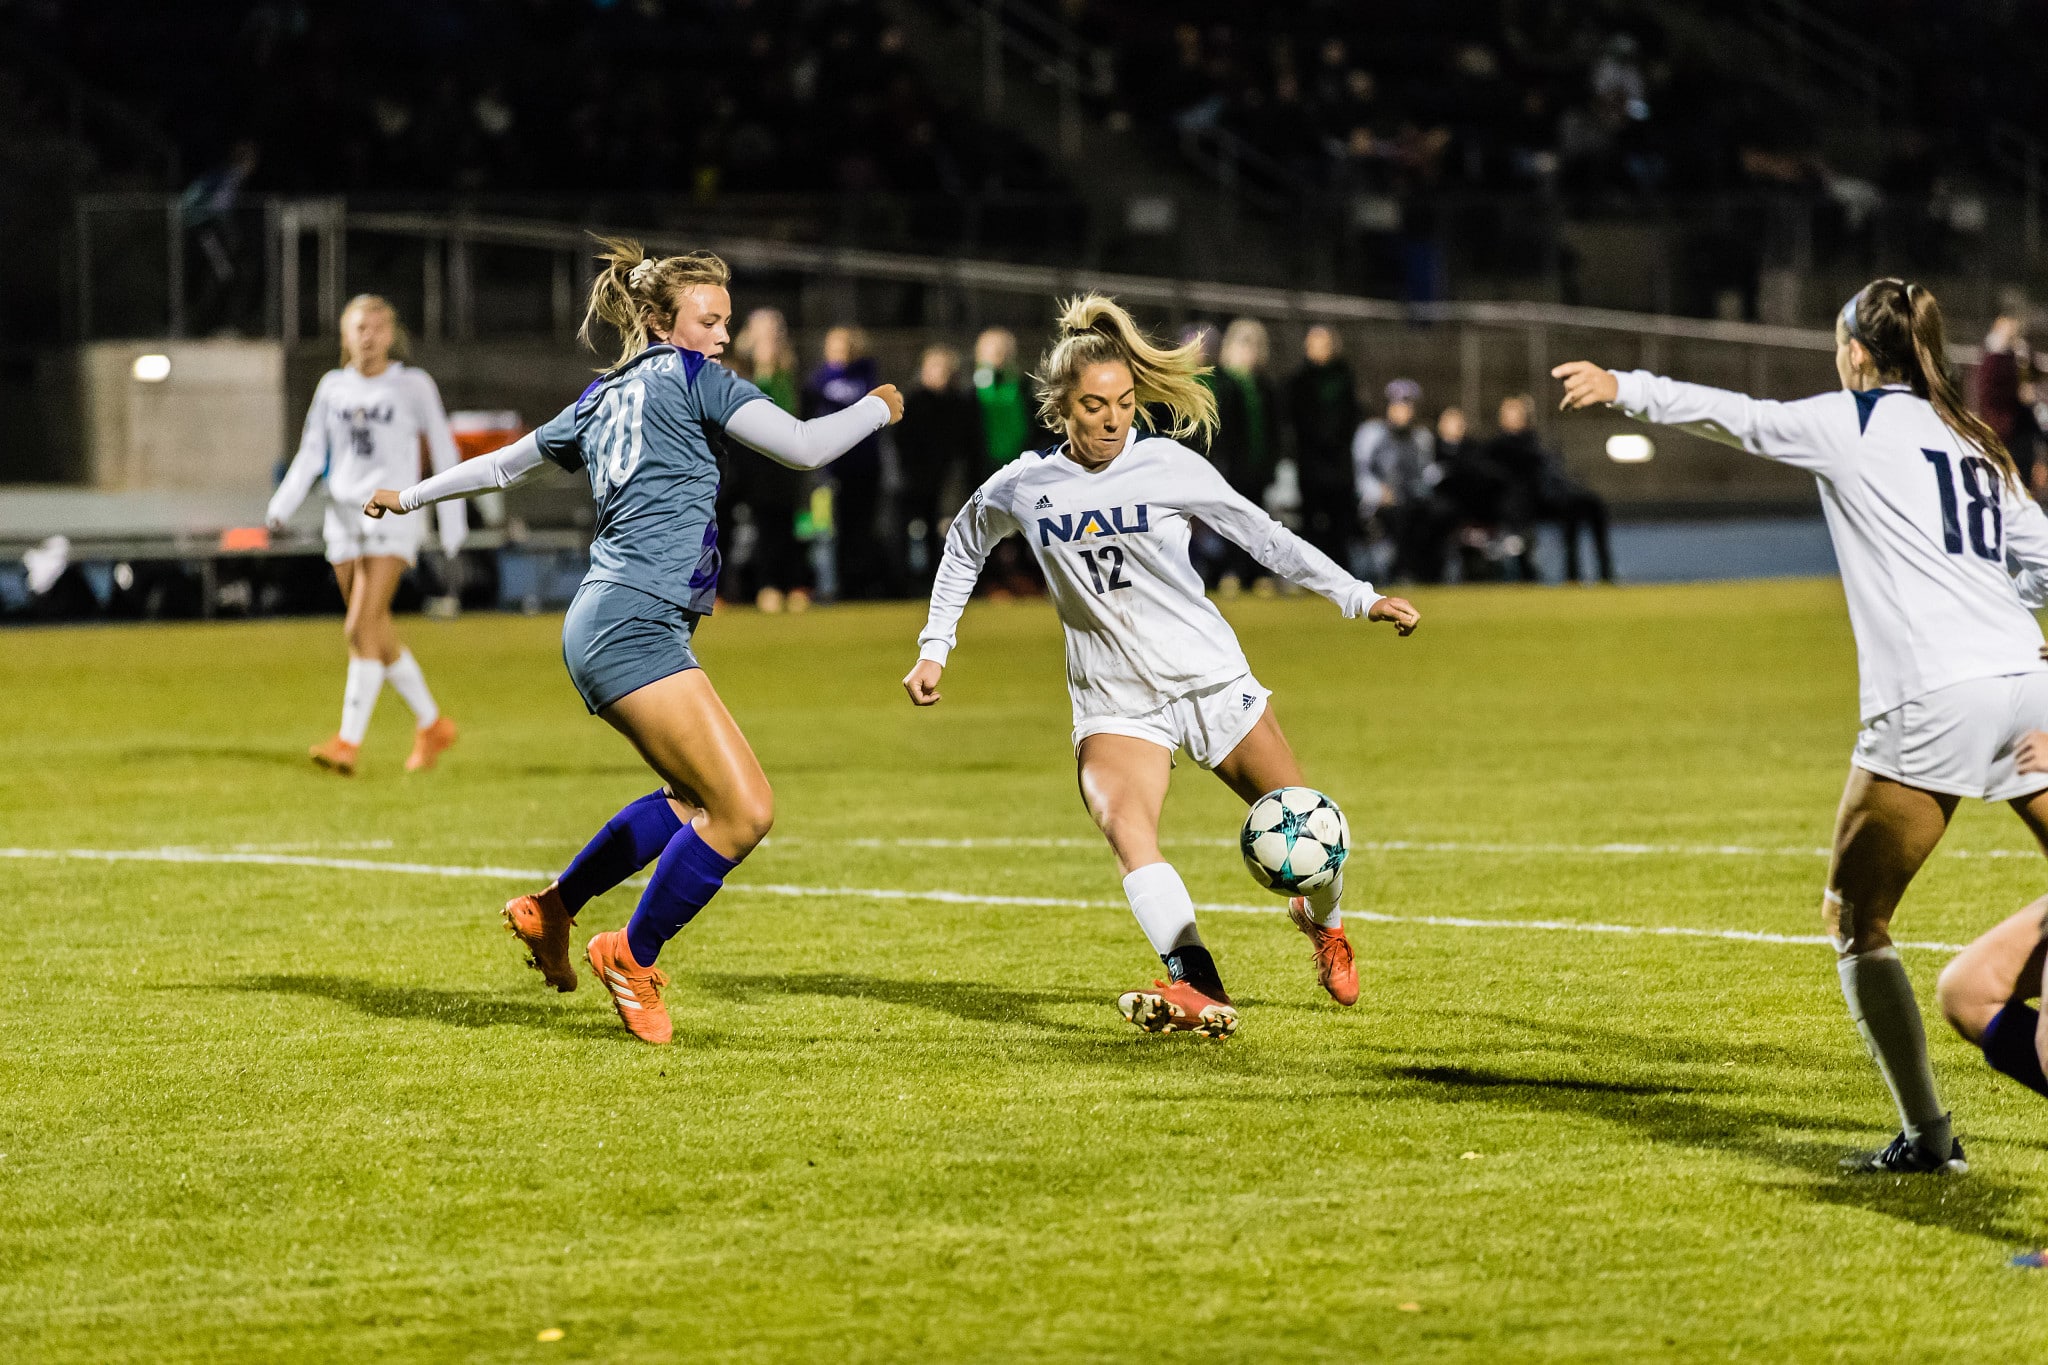 Three soccer players competing for the ball during a women's soccer game